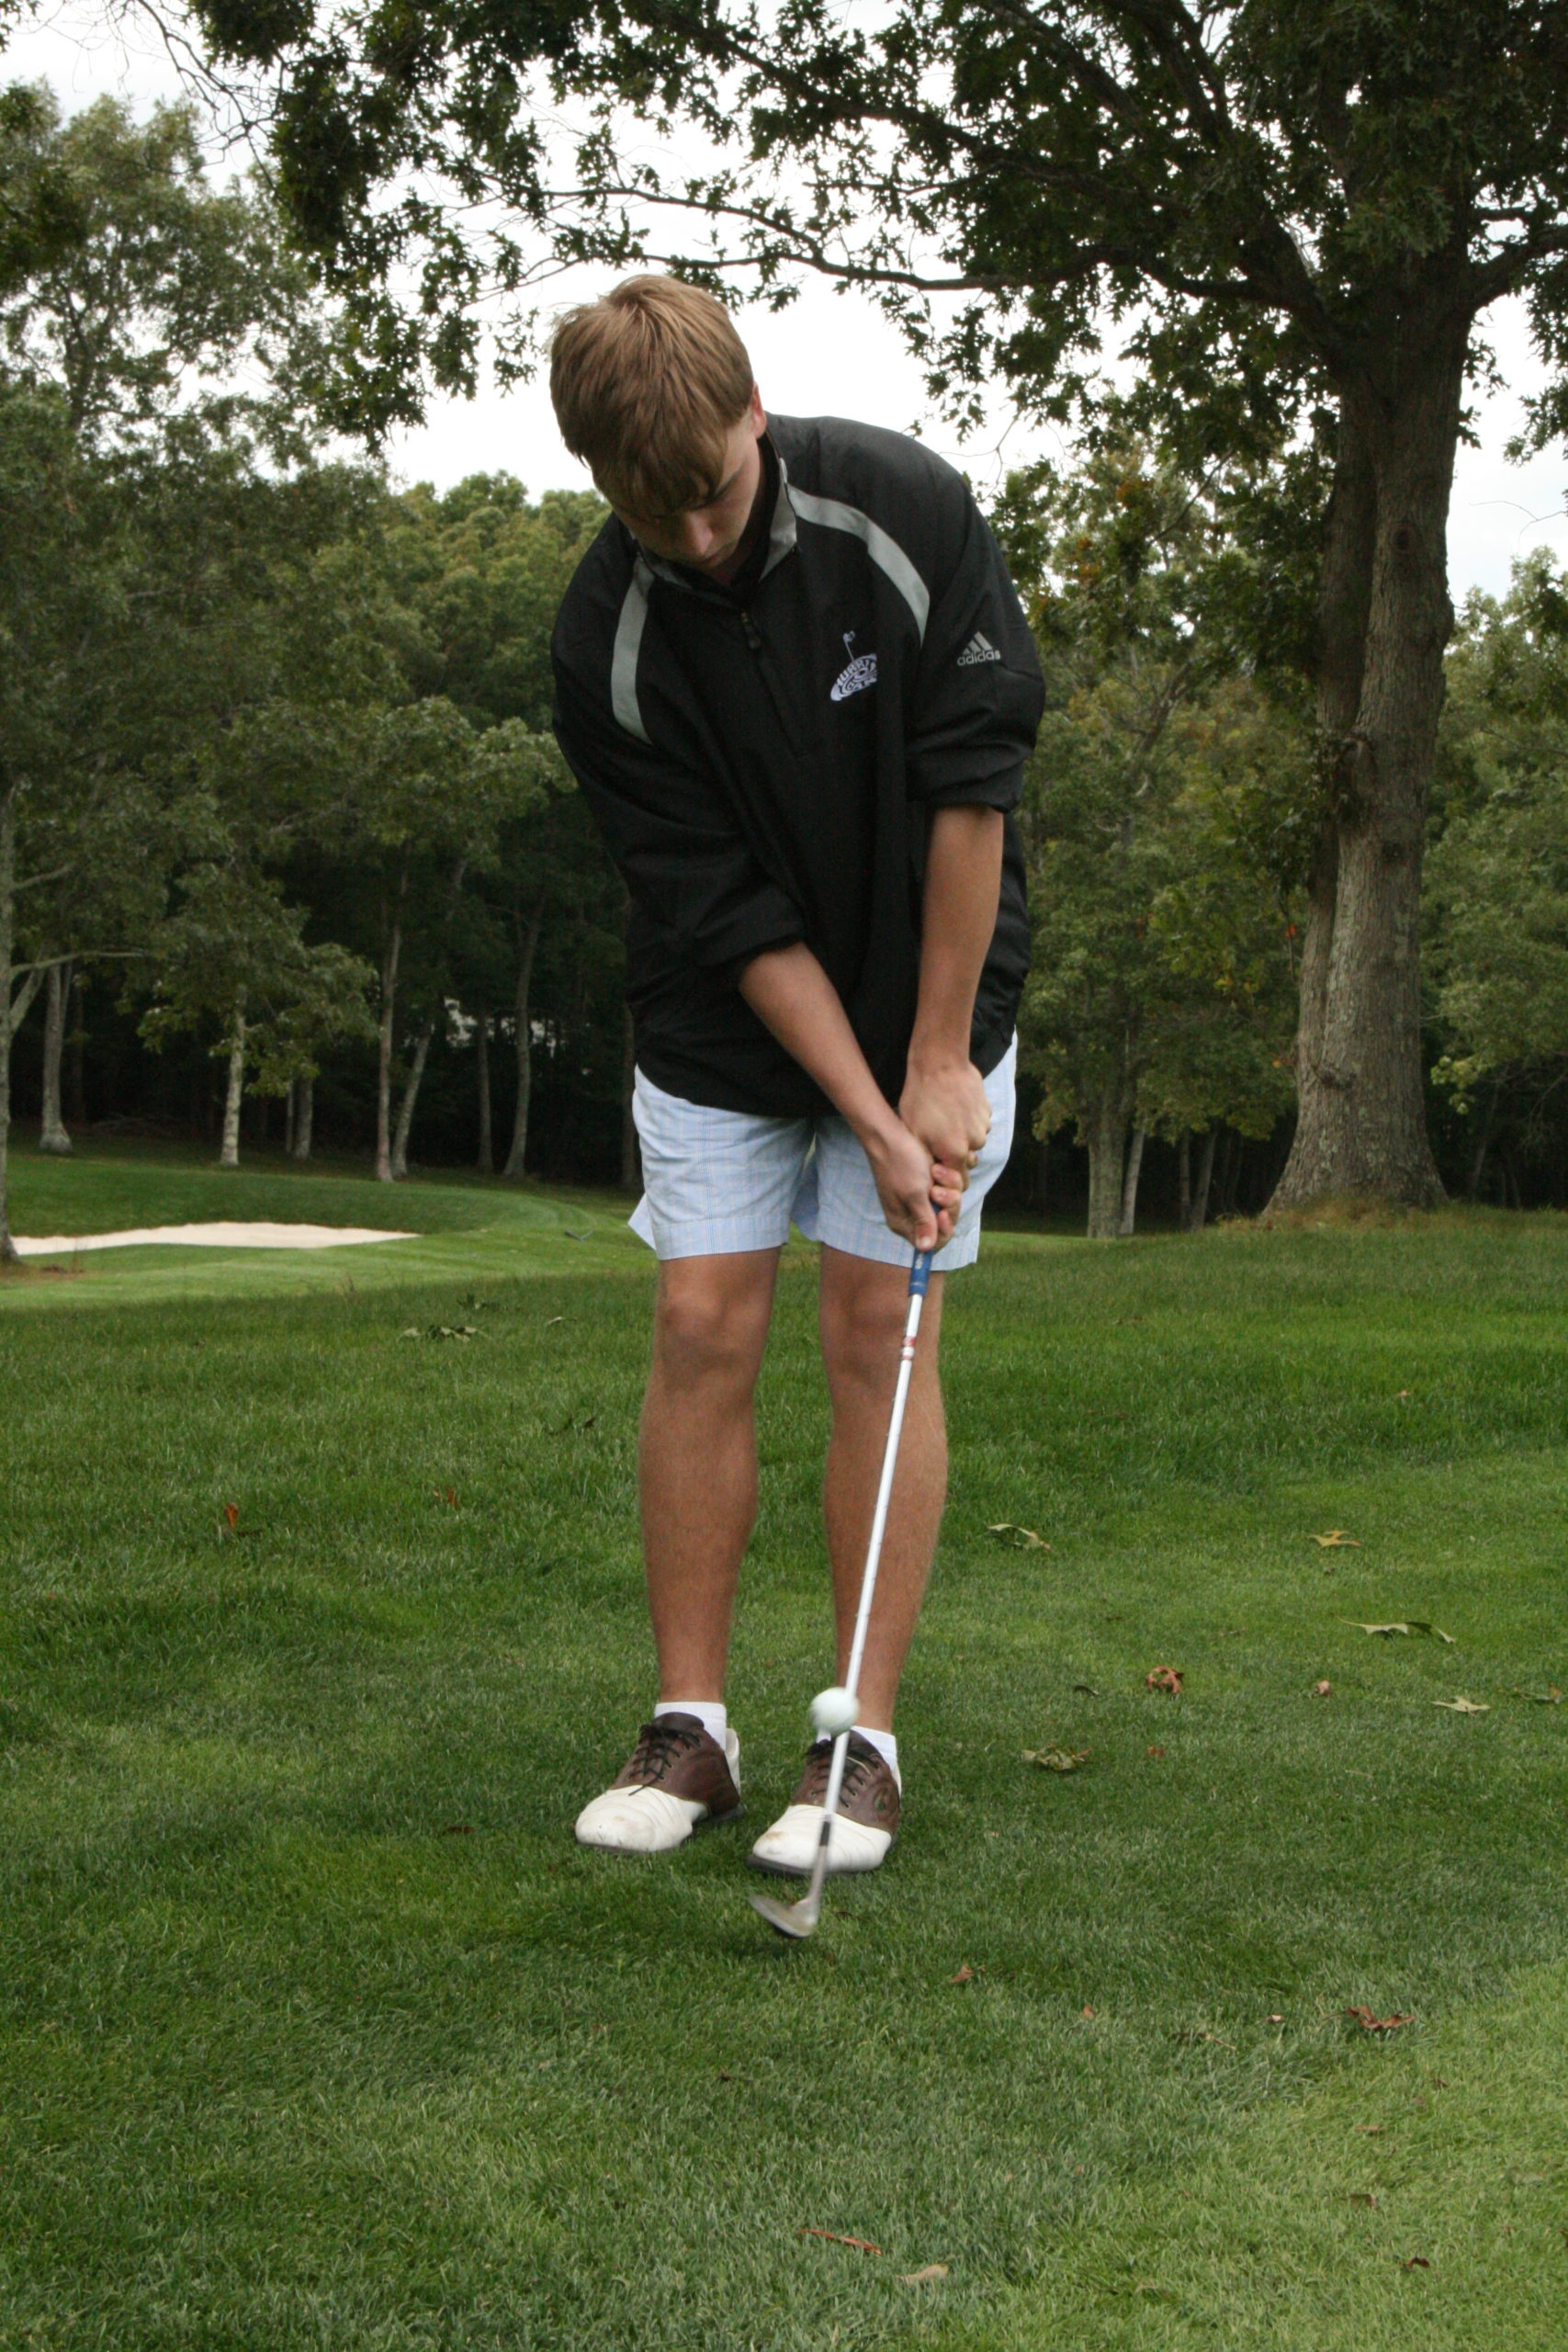 C.J. Andrews was a key golfer for Westhampton Beach, playing on the varsity team as an eighth grader and through into his high school years.